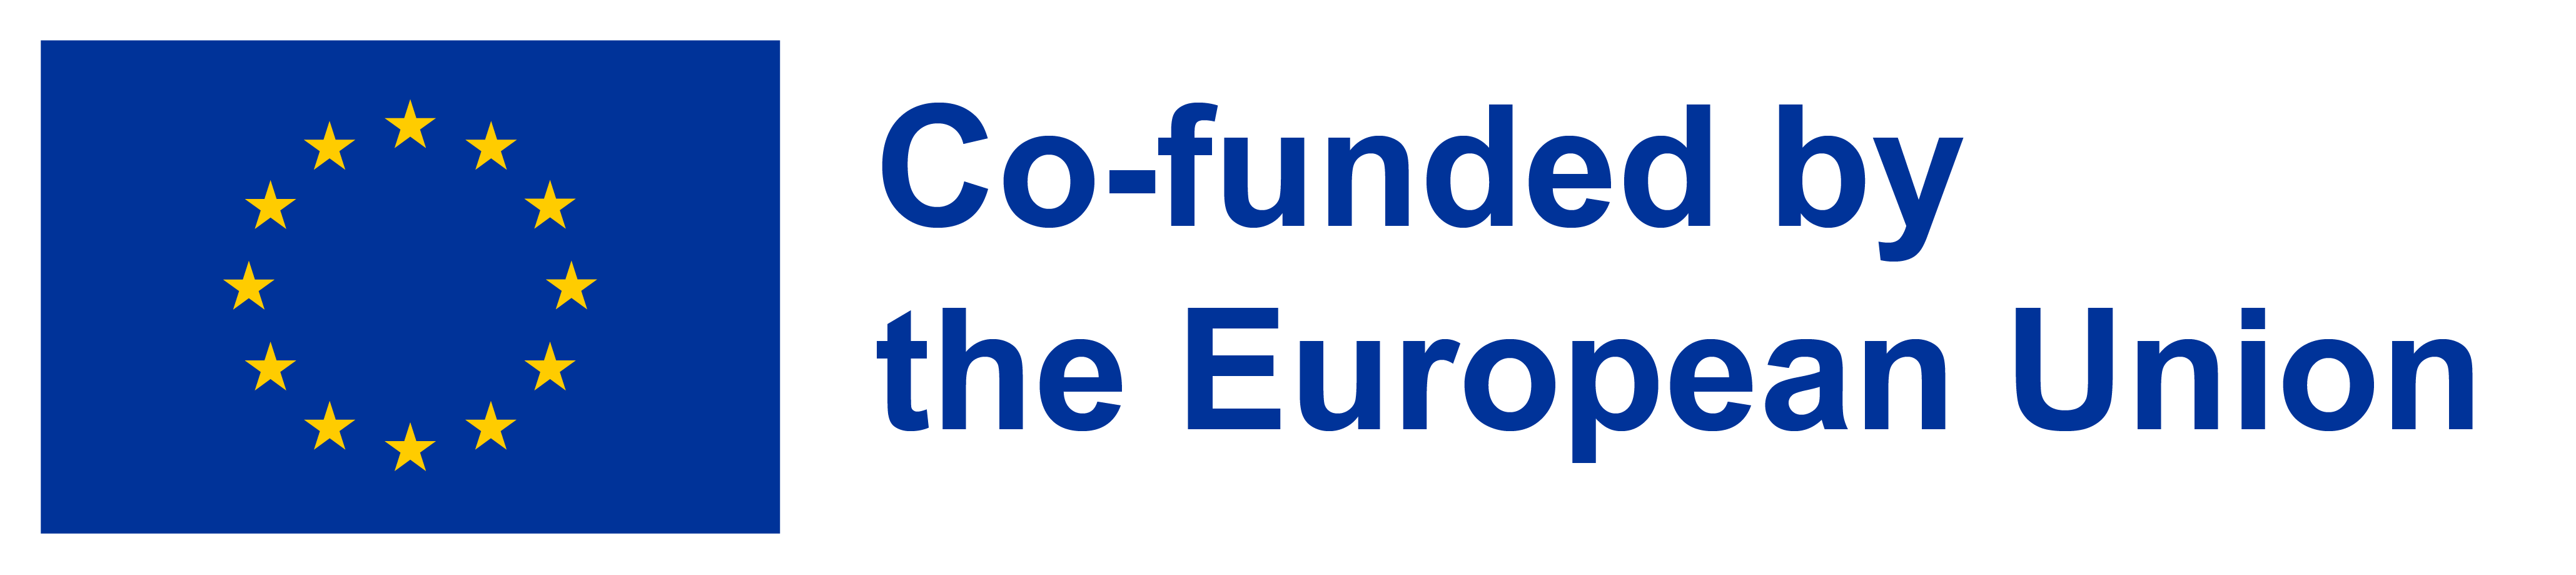 Co-funded by EU -logo.